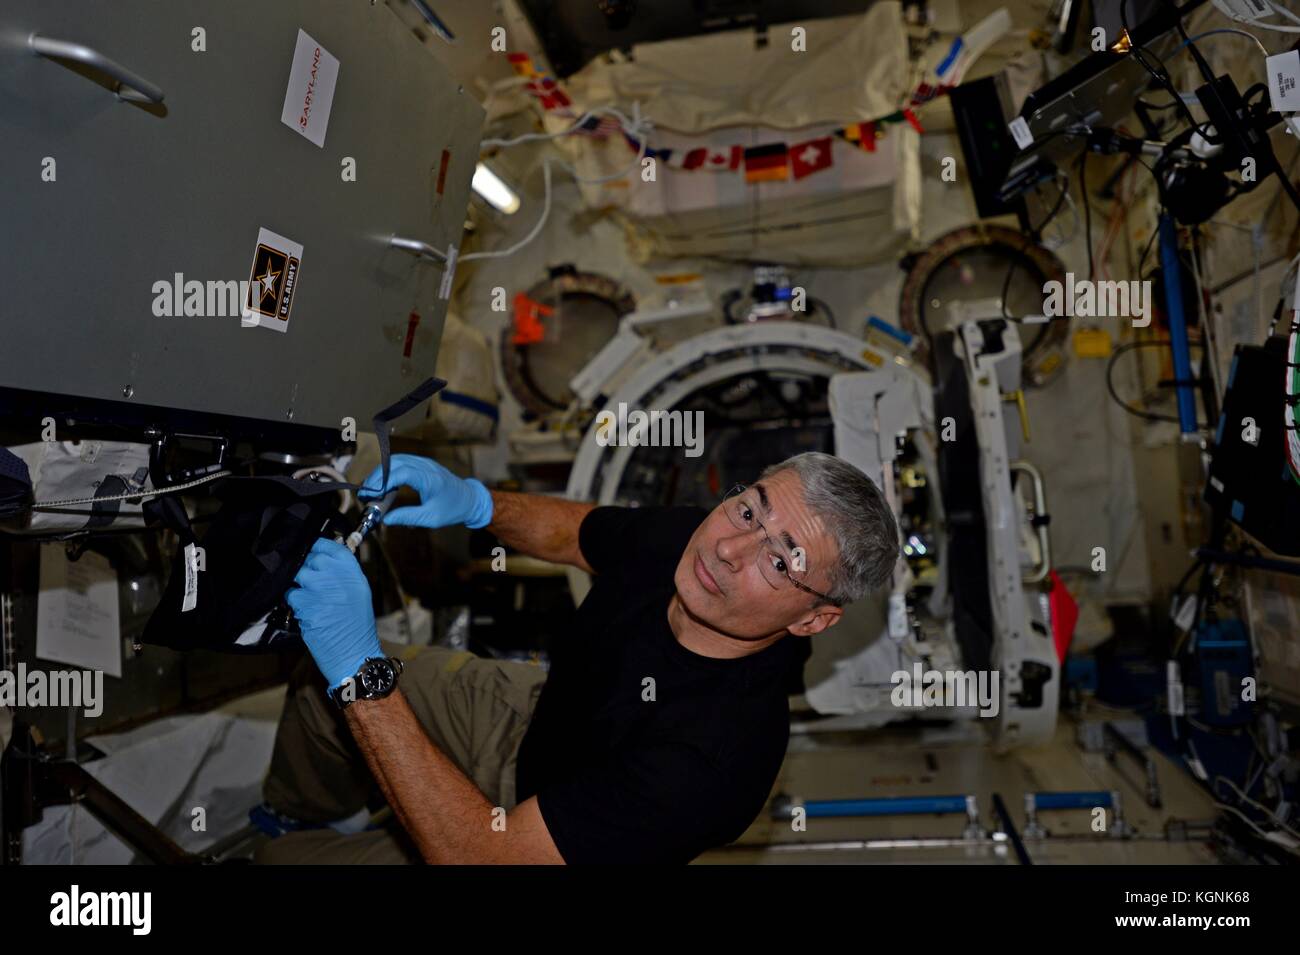 International Space Station, Earth Orbit. 08th Nov, 2017. Expedition 53 American astronaut Mark Vande Hei prepares the Japanese Space Agency satellites for launch from the International Space Station November 8, 2017 in Earth Orbit. Credit: Planetpix/Alamy Live News Stock Photo